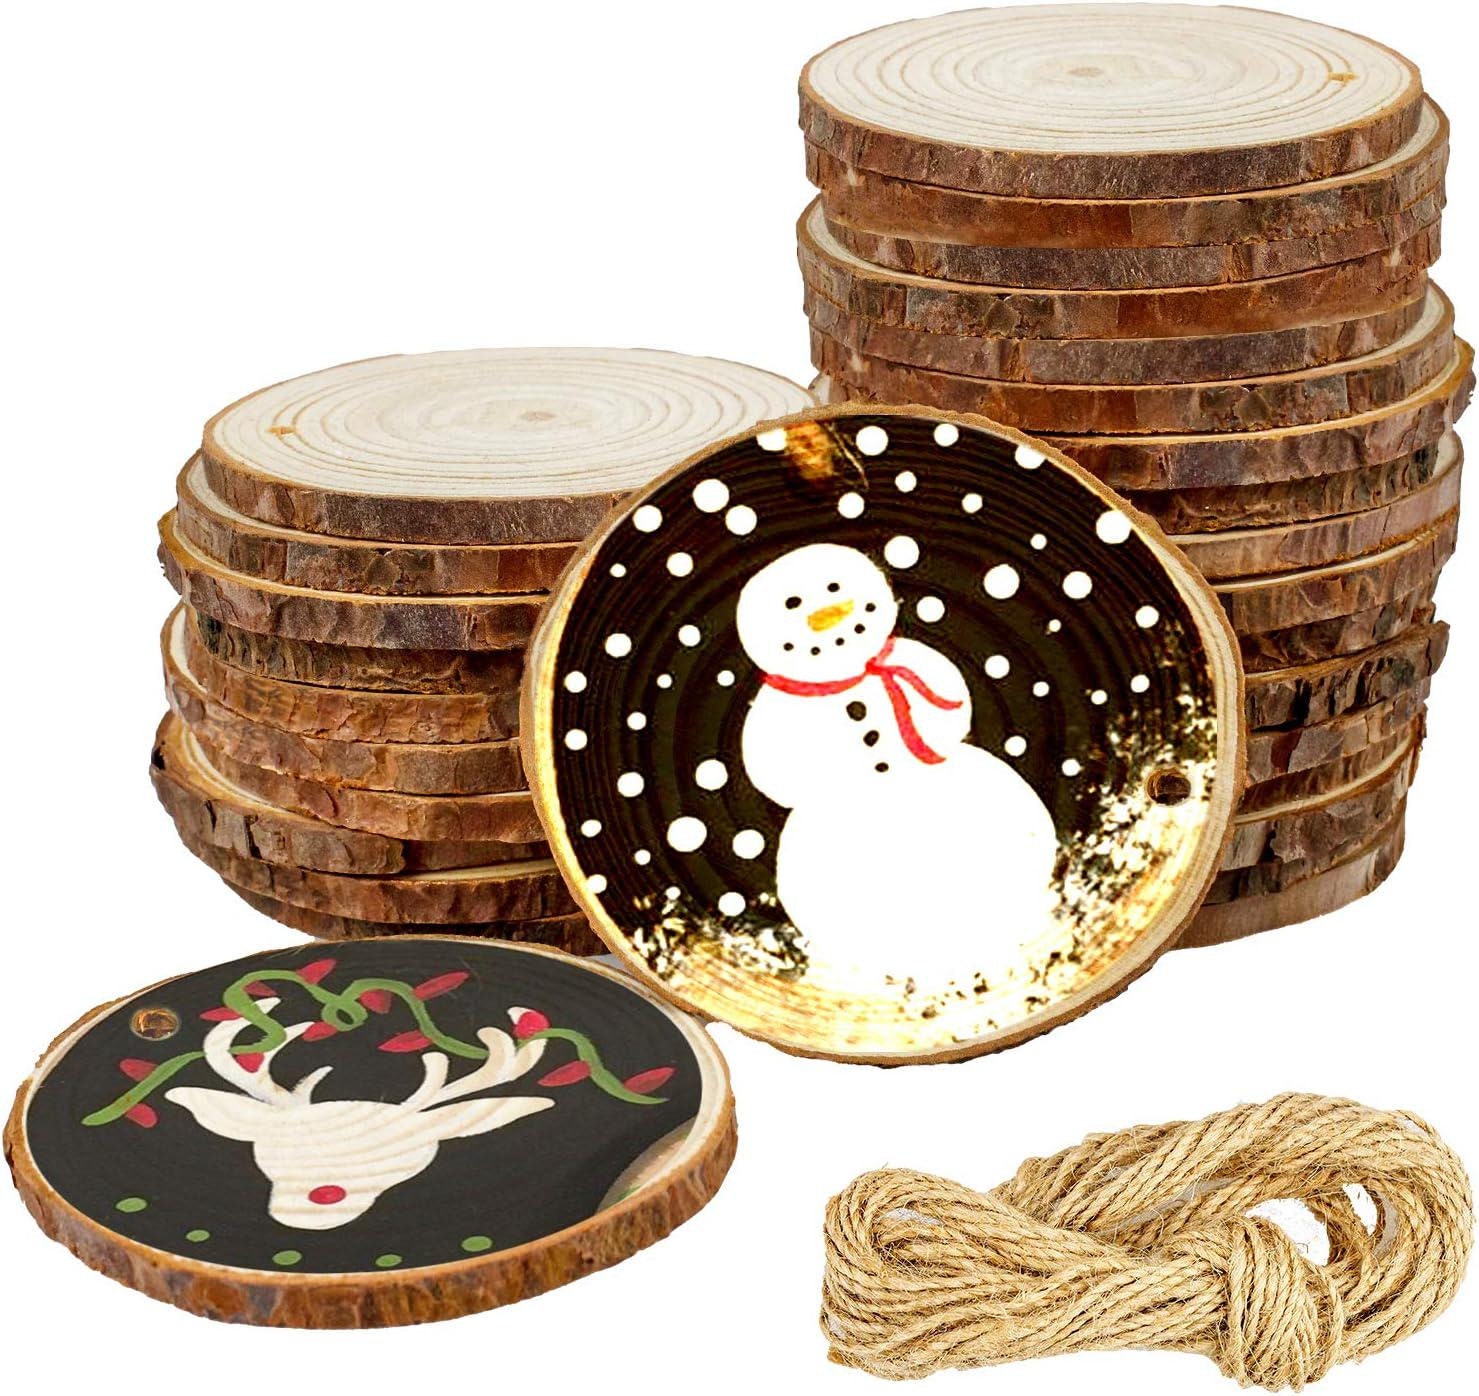 Coadura Unfinished Natural Wood Slices 30pcs 3.5-4 inch Round Wood Discs for Crafts Wood Christmas Ornaments,Wedding Centerpieces Paintings DIY